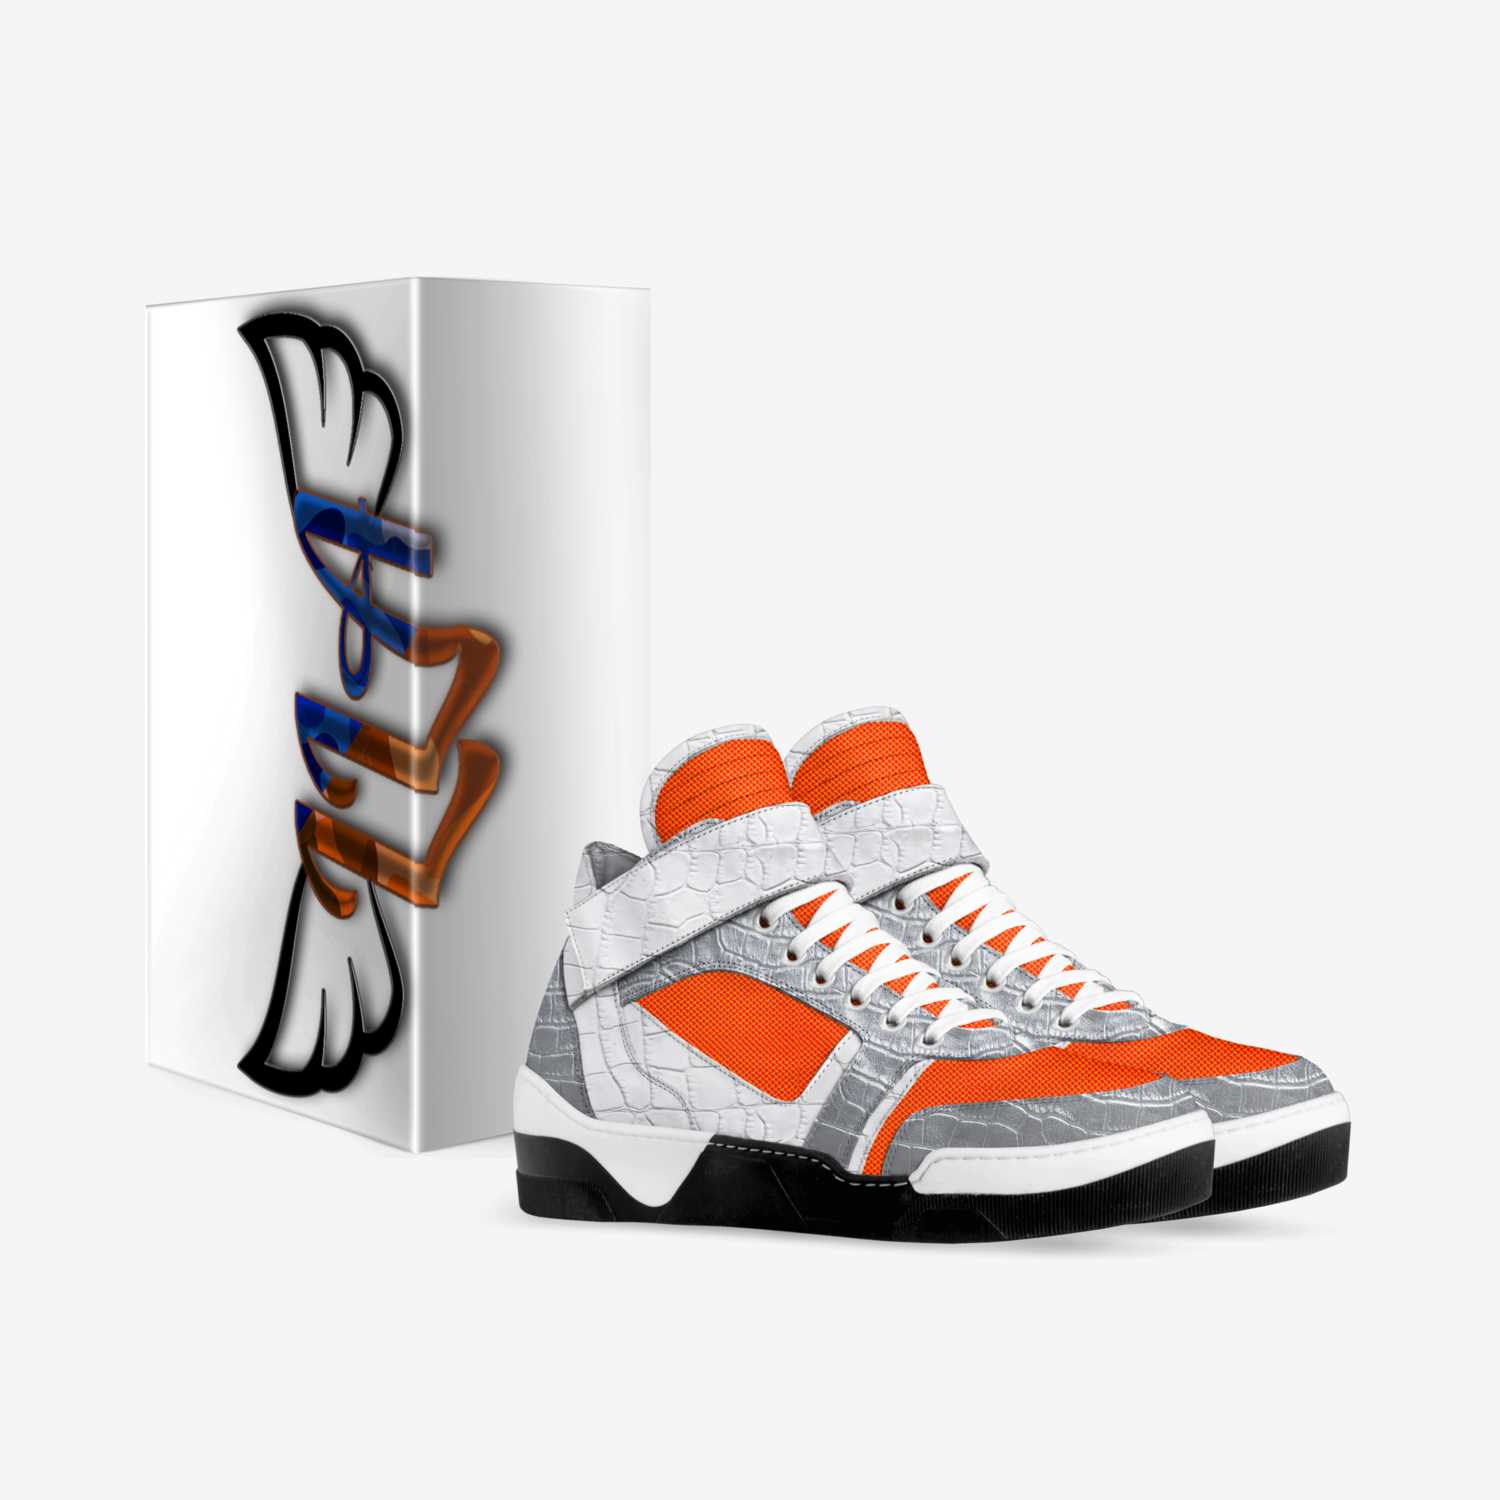 LLA G2s custom made in Italy shoes by Living Life Apparel Llc | Box view